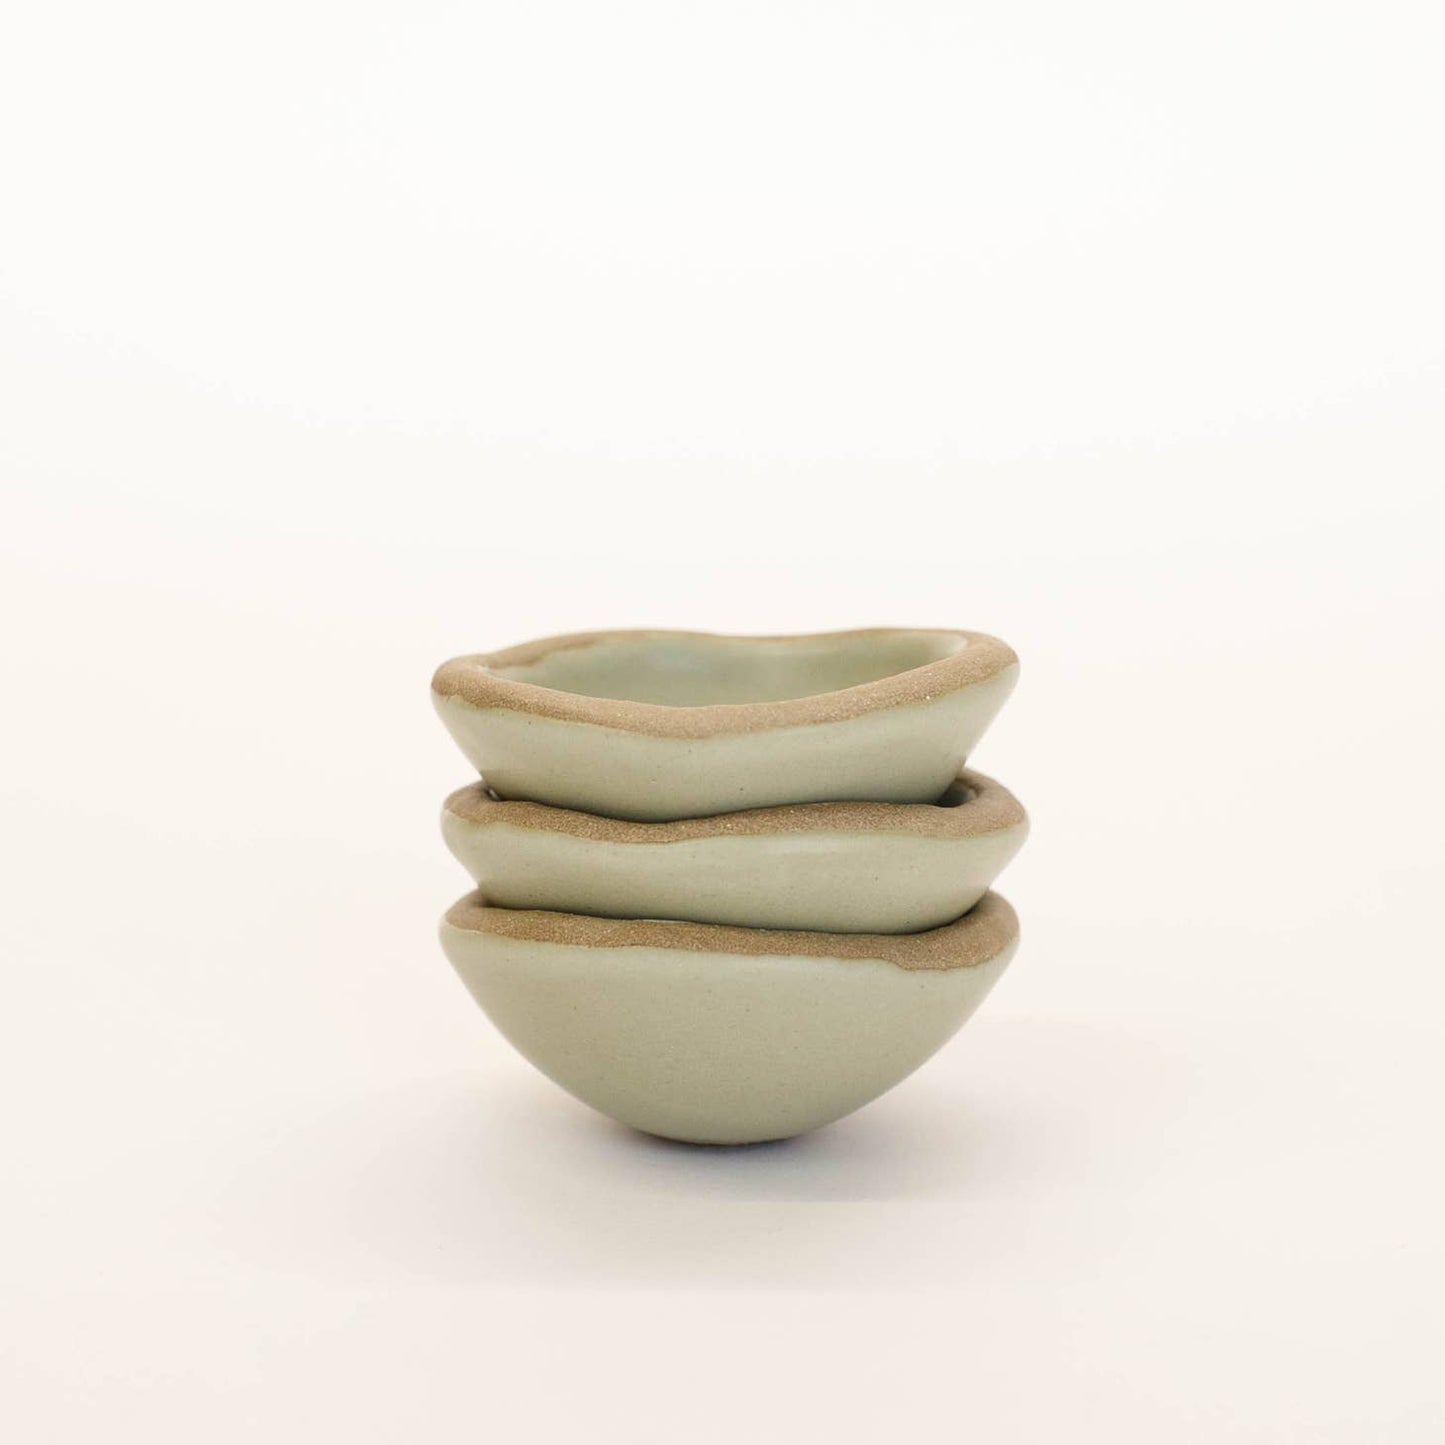 This tiny ceramic dish is small but mighty! Multi-purpose and incredibly durable, made of stoneware clay. For q-tips in the bathroom, bedside for jewelry, or in the kitchen for spices - This dish functions best when there is at least one in every room of a home!   Handmade in Virginia